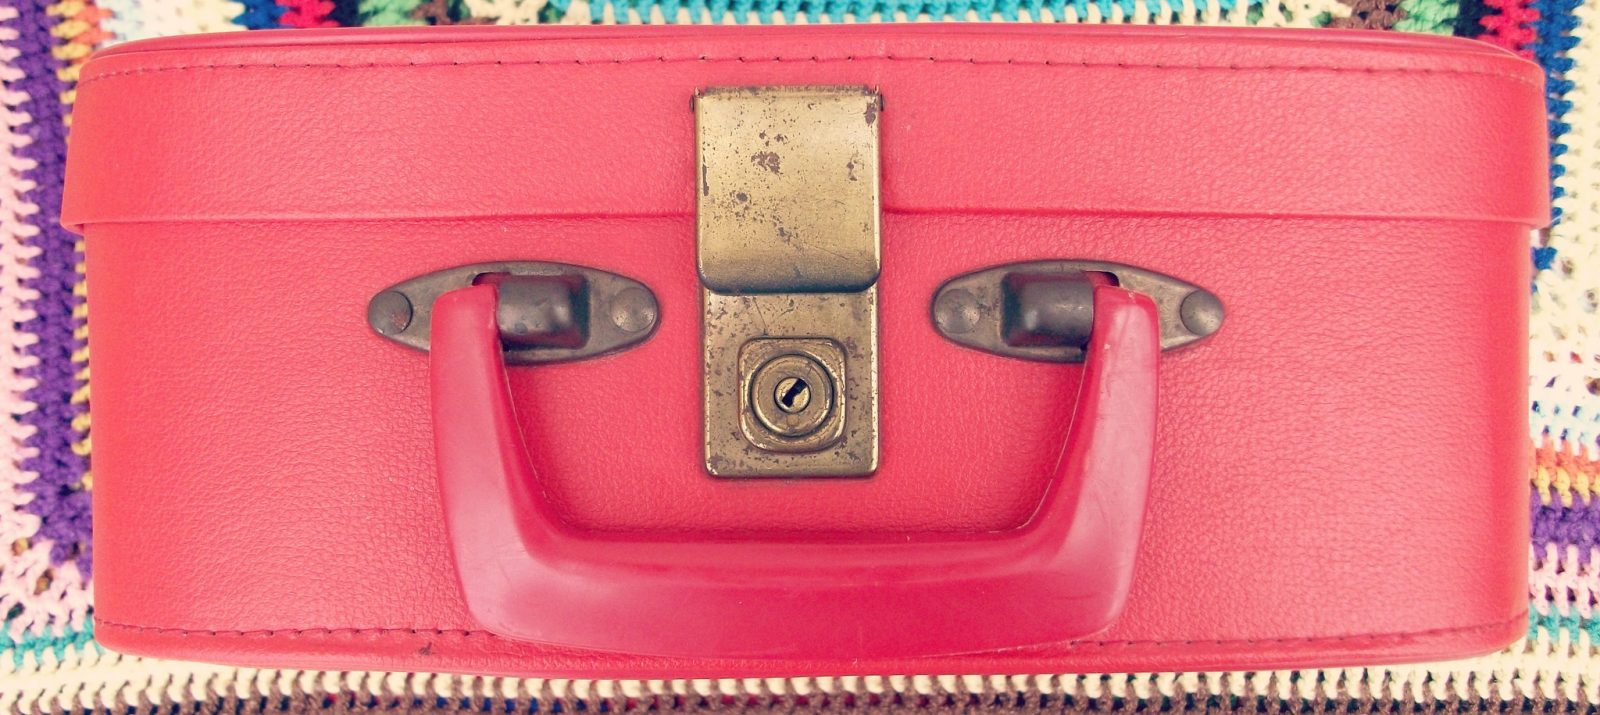 7 Tips for Organizing and Storing Your Handbags